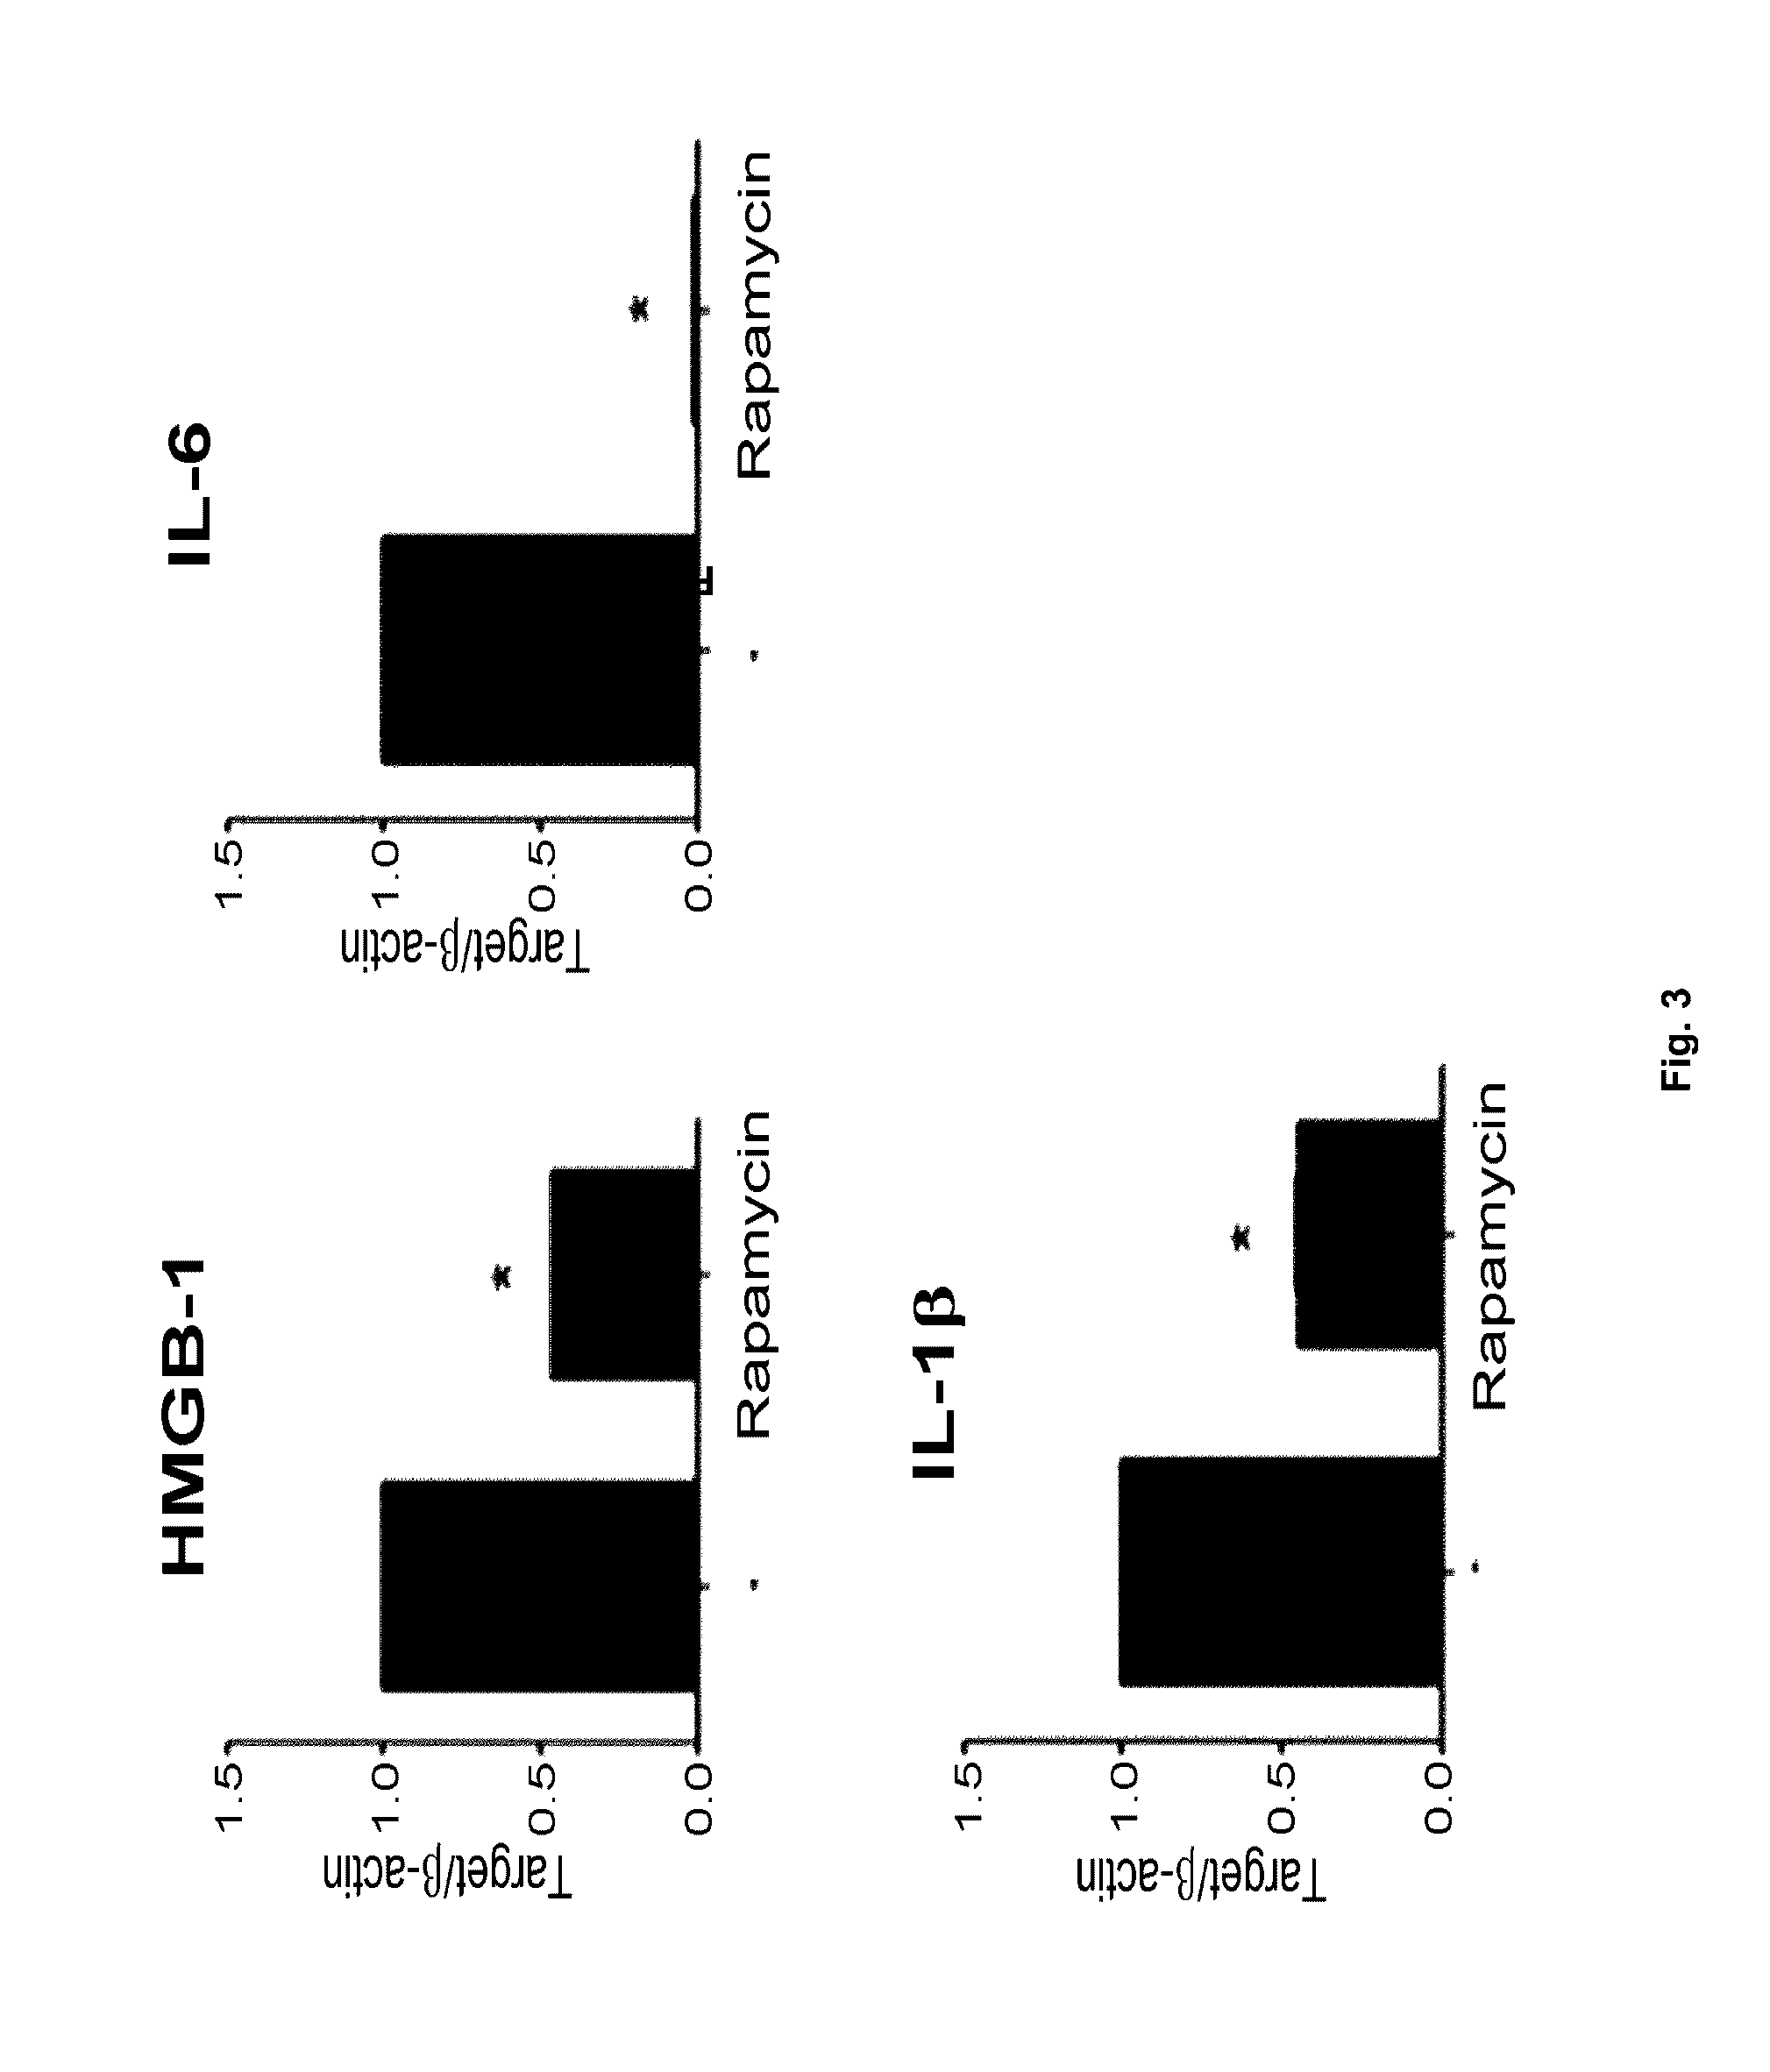 Mtor/stat3 signal inhibitor-treated mesenchymal stem cell having immunomodulatory activity, and cell therapy composition comprising same, for preventing or treating immune disorders